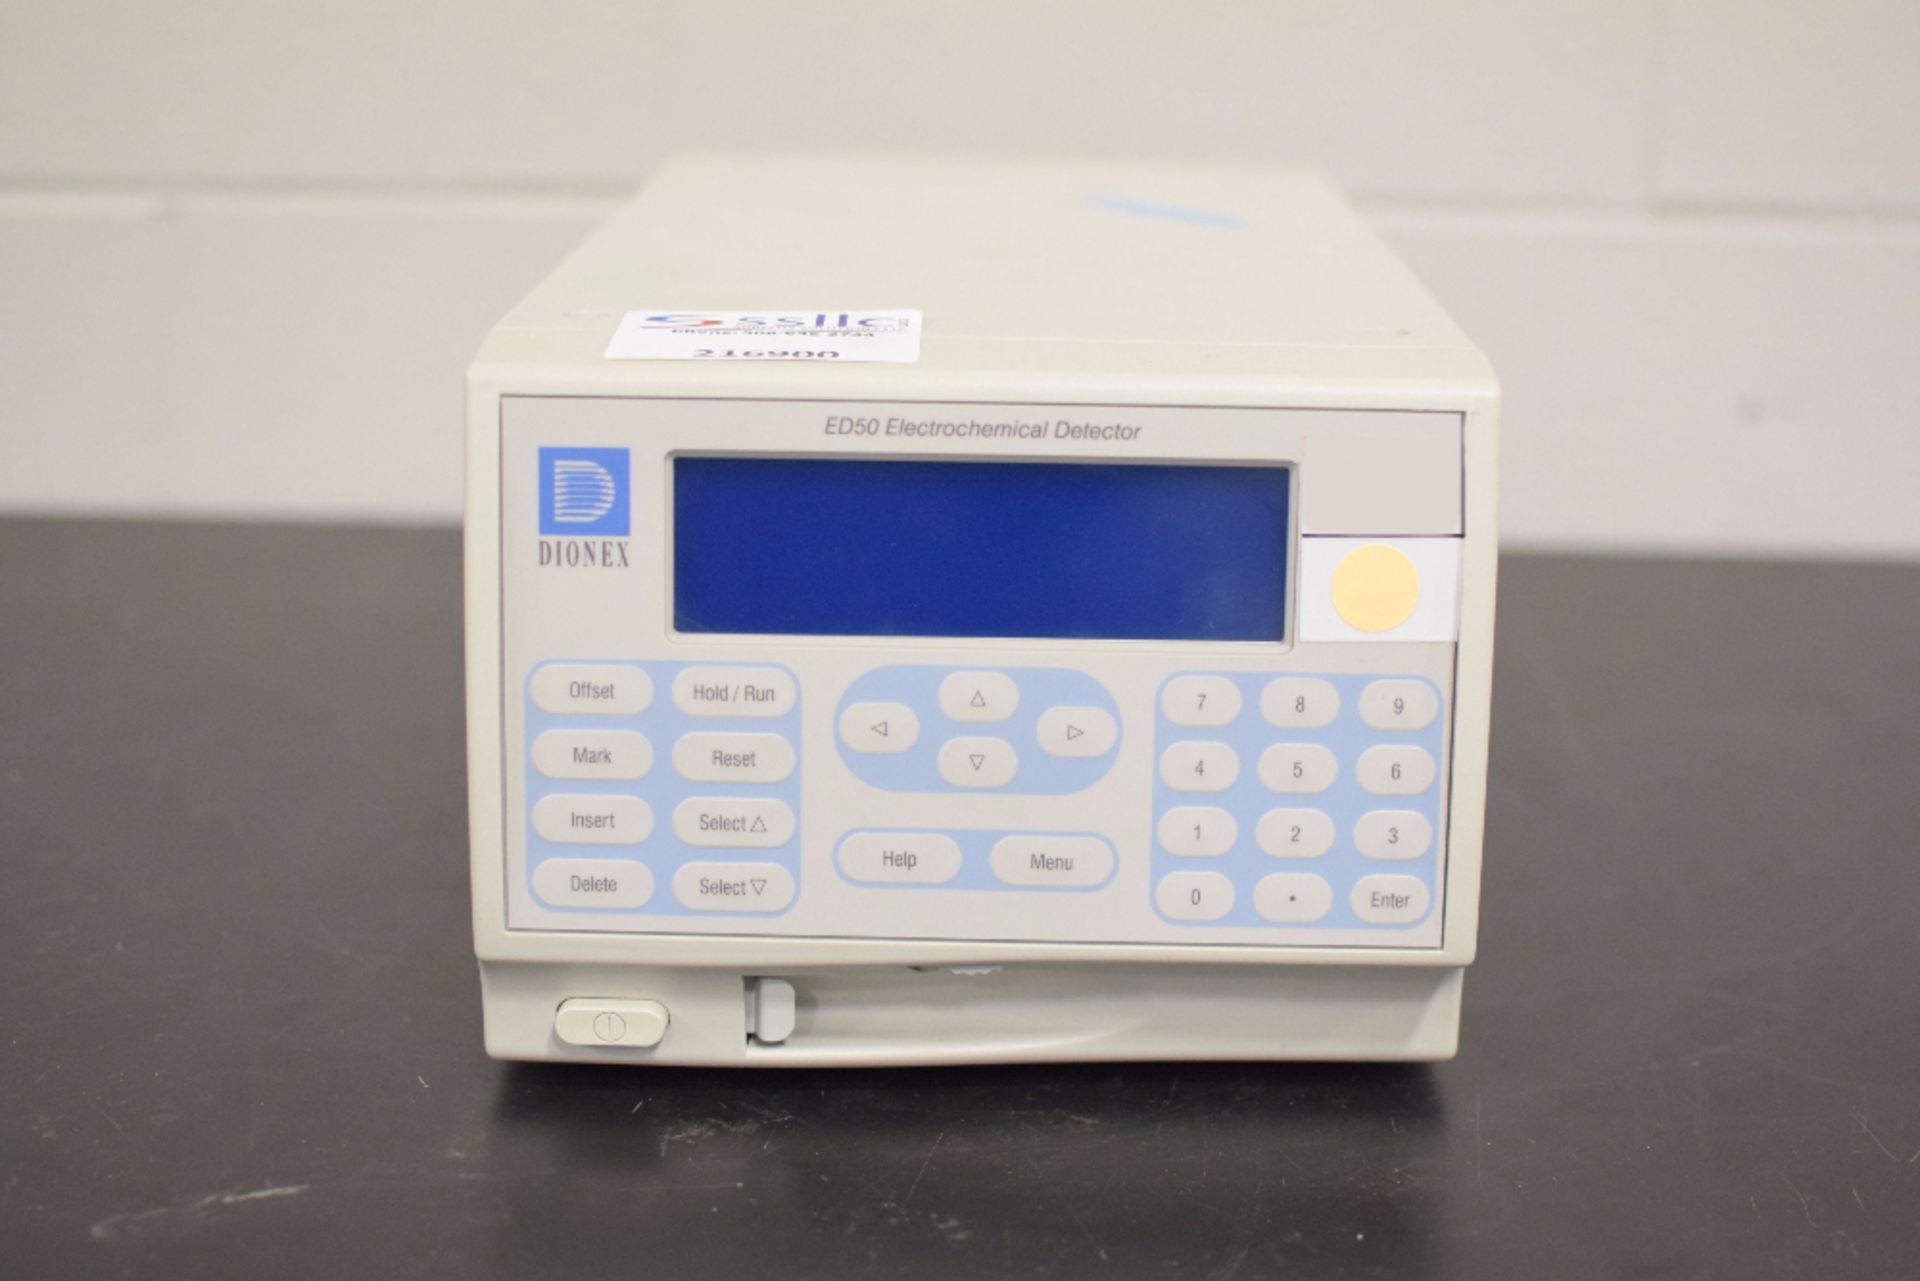 Dionex ED50 ED50 Electrochemical Detector